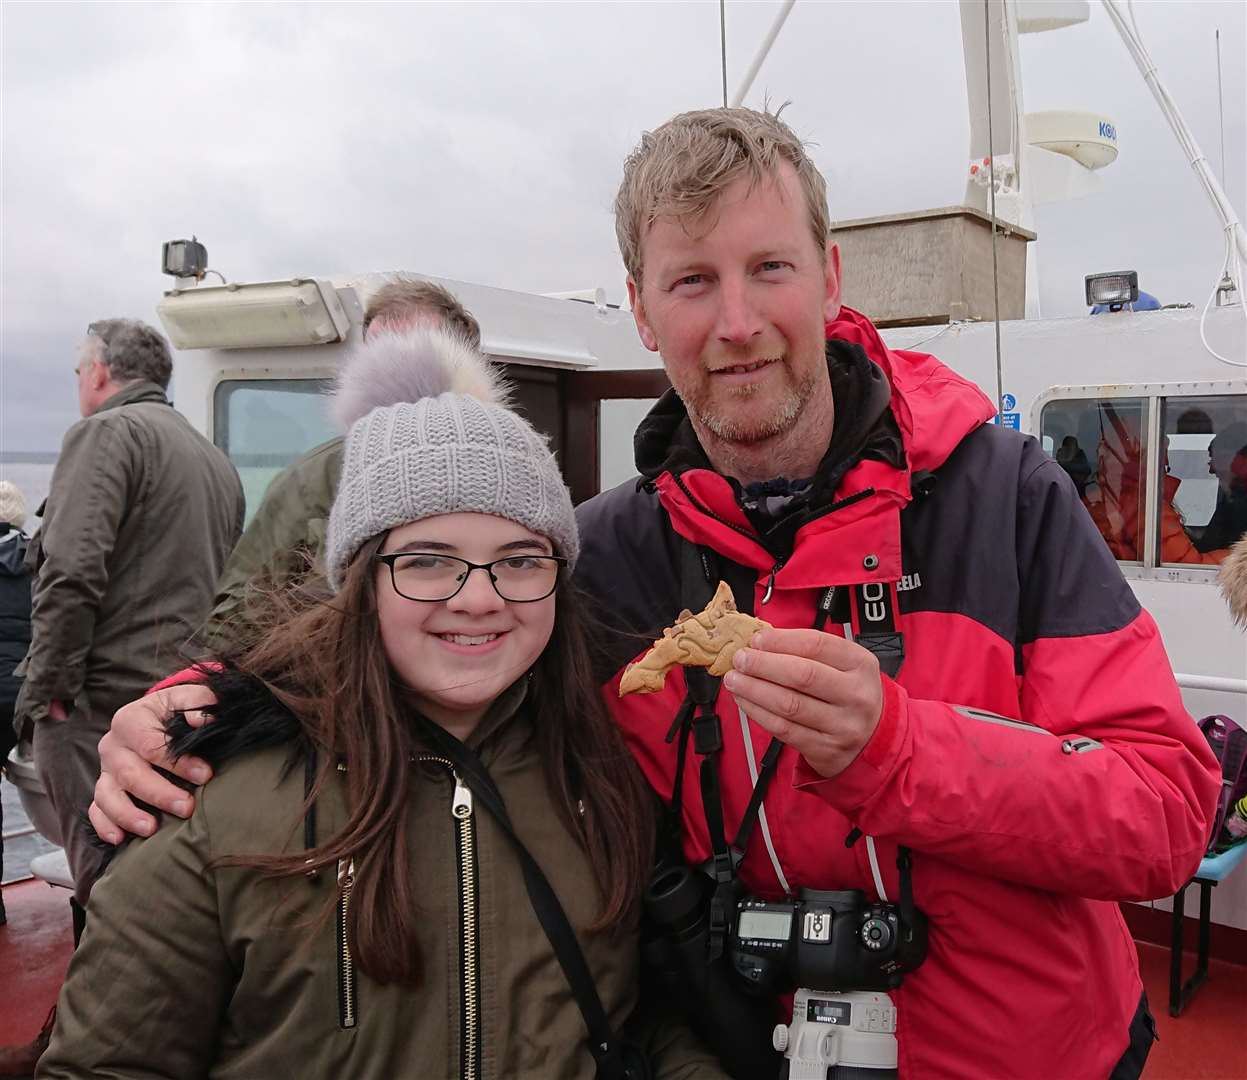 Steve Truluck with one of the young orca watchers, Freya Webb, on the Pentland Venture. Freya baked some orca-shaped cookies for other watchers.